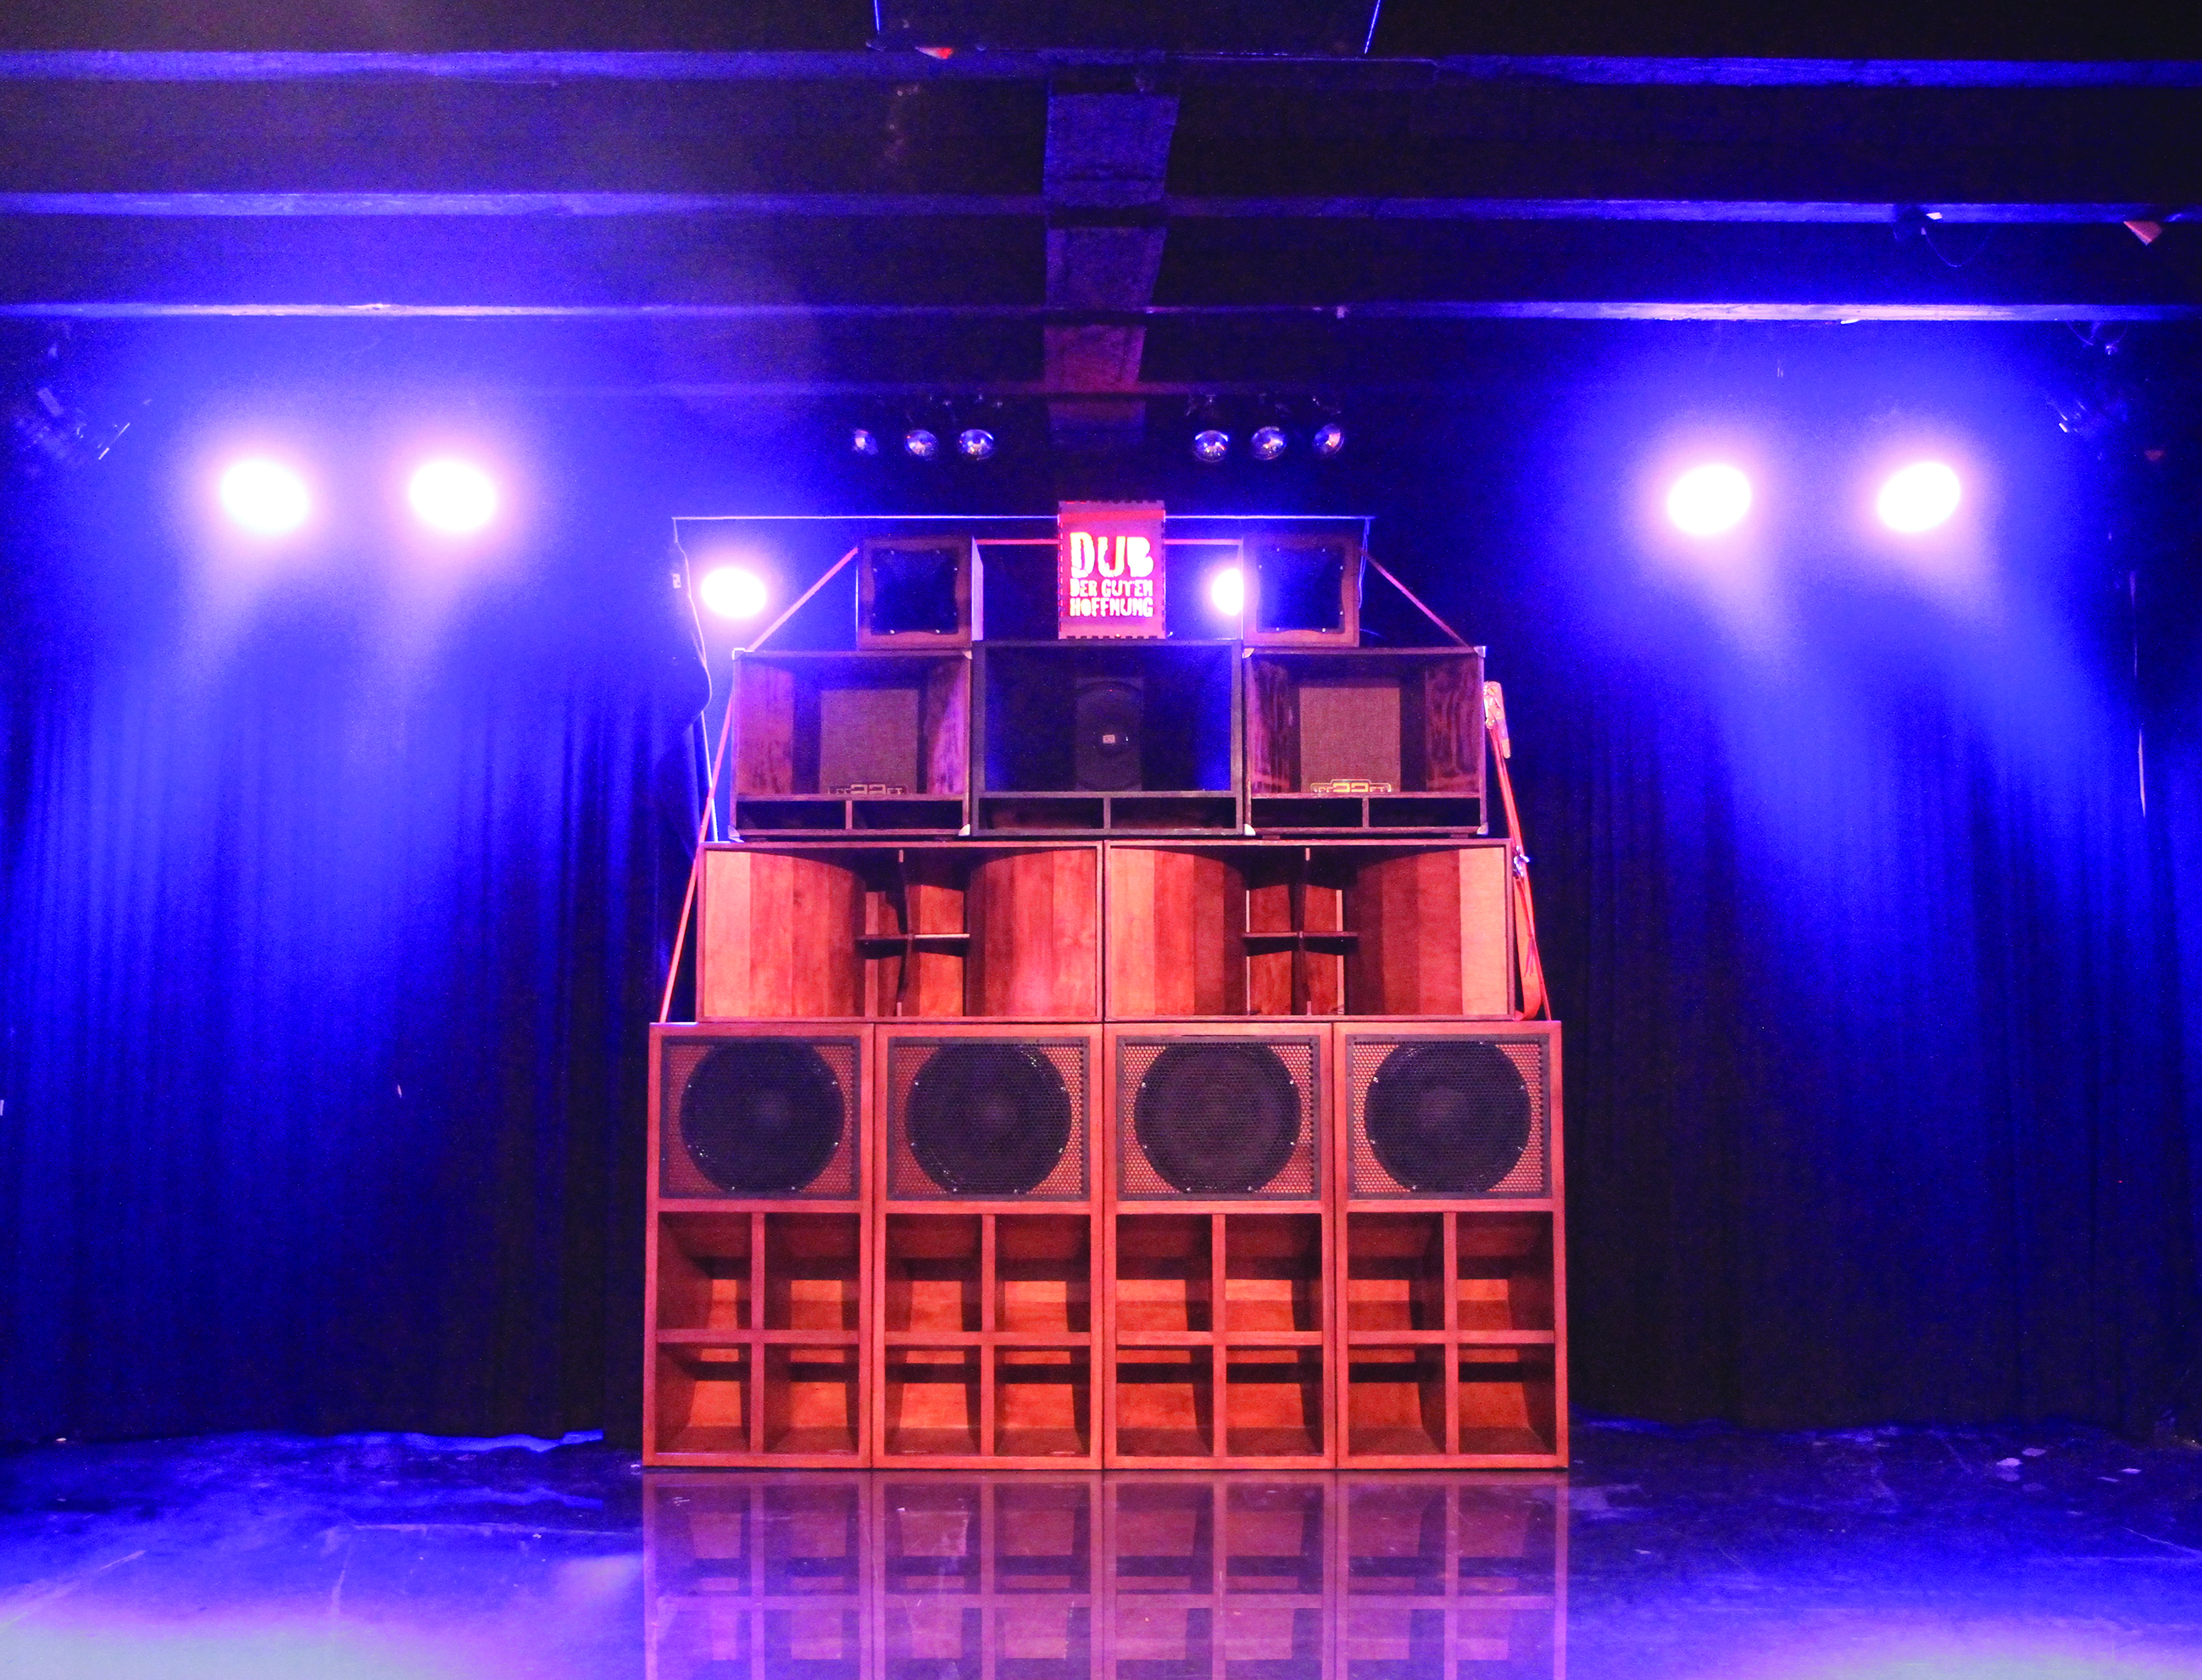 There is nothing like a Sound System